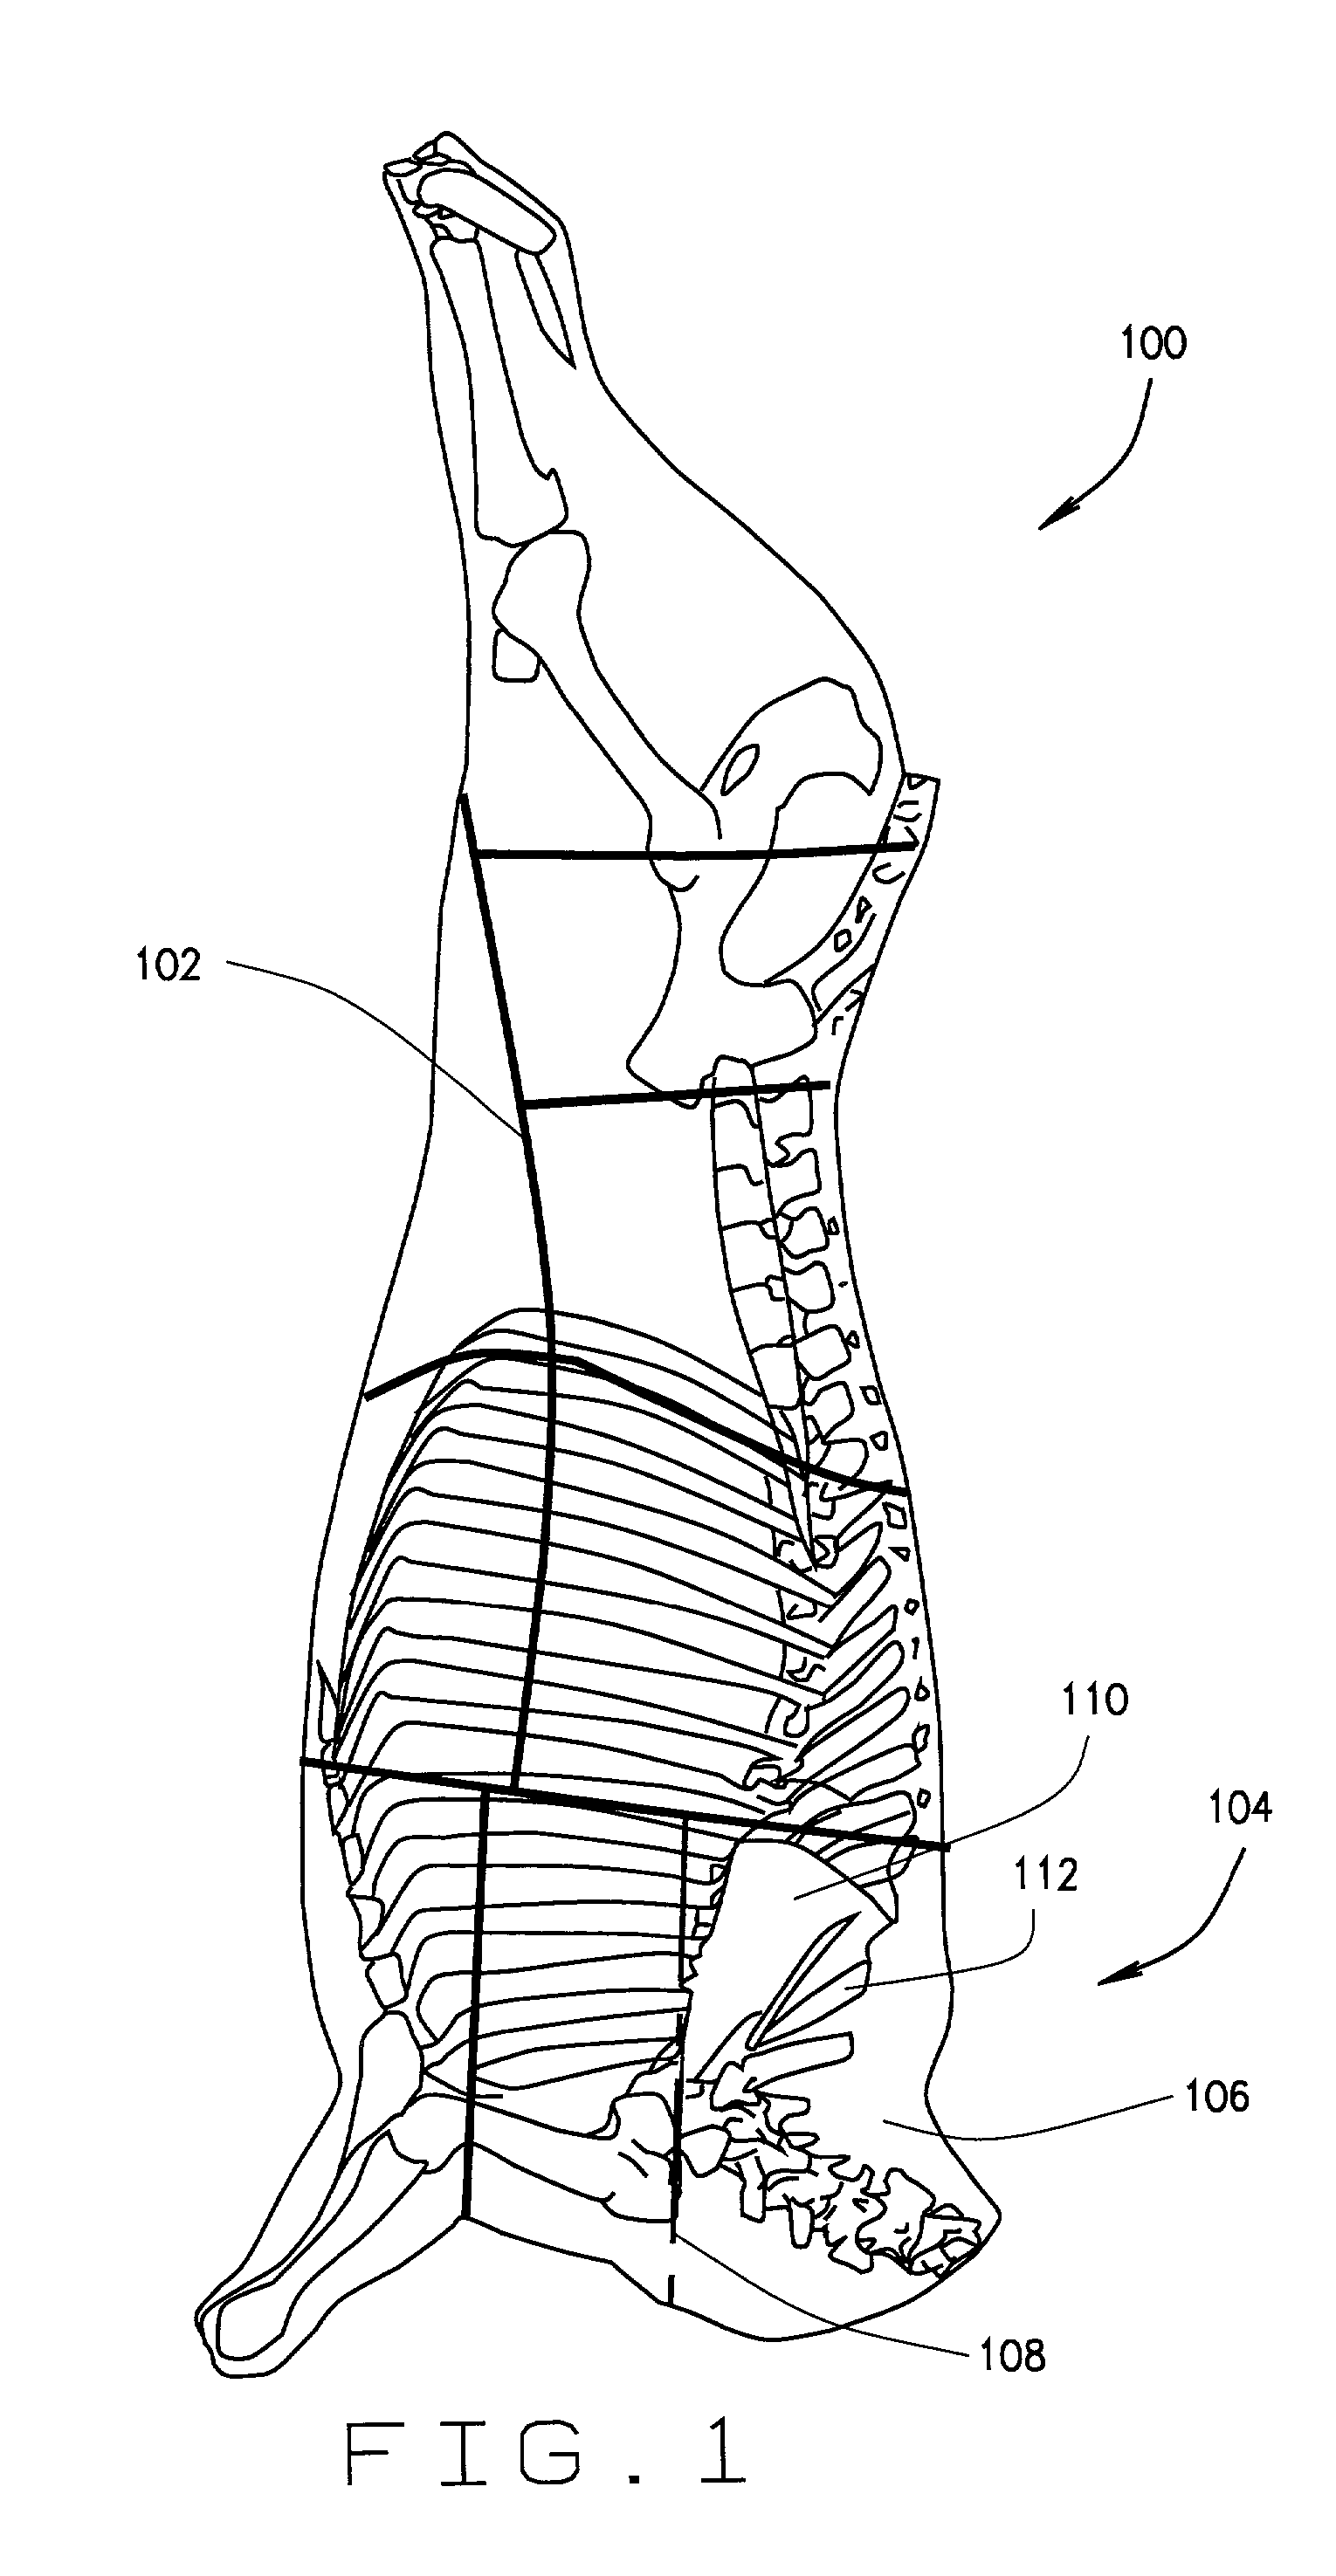 Apparatus and method for removing bones from a disassembled animal carcass